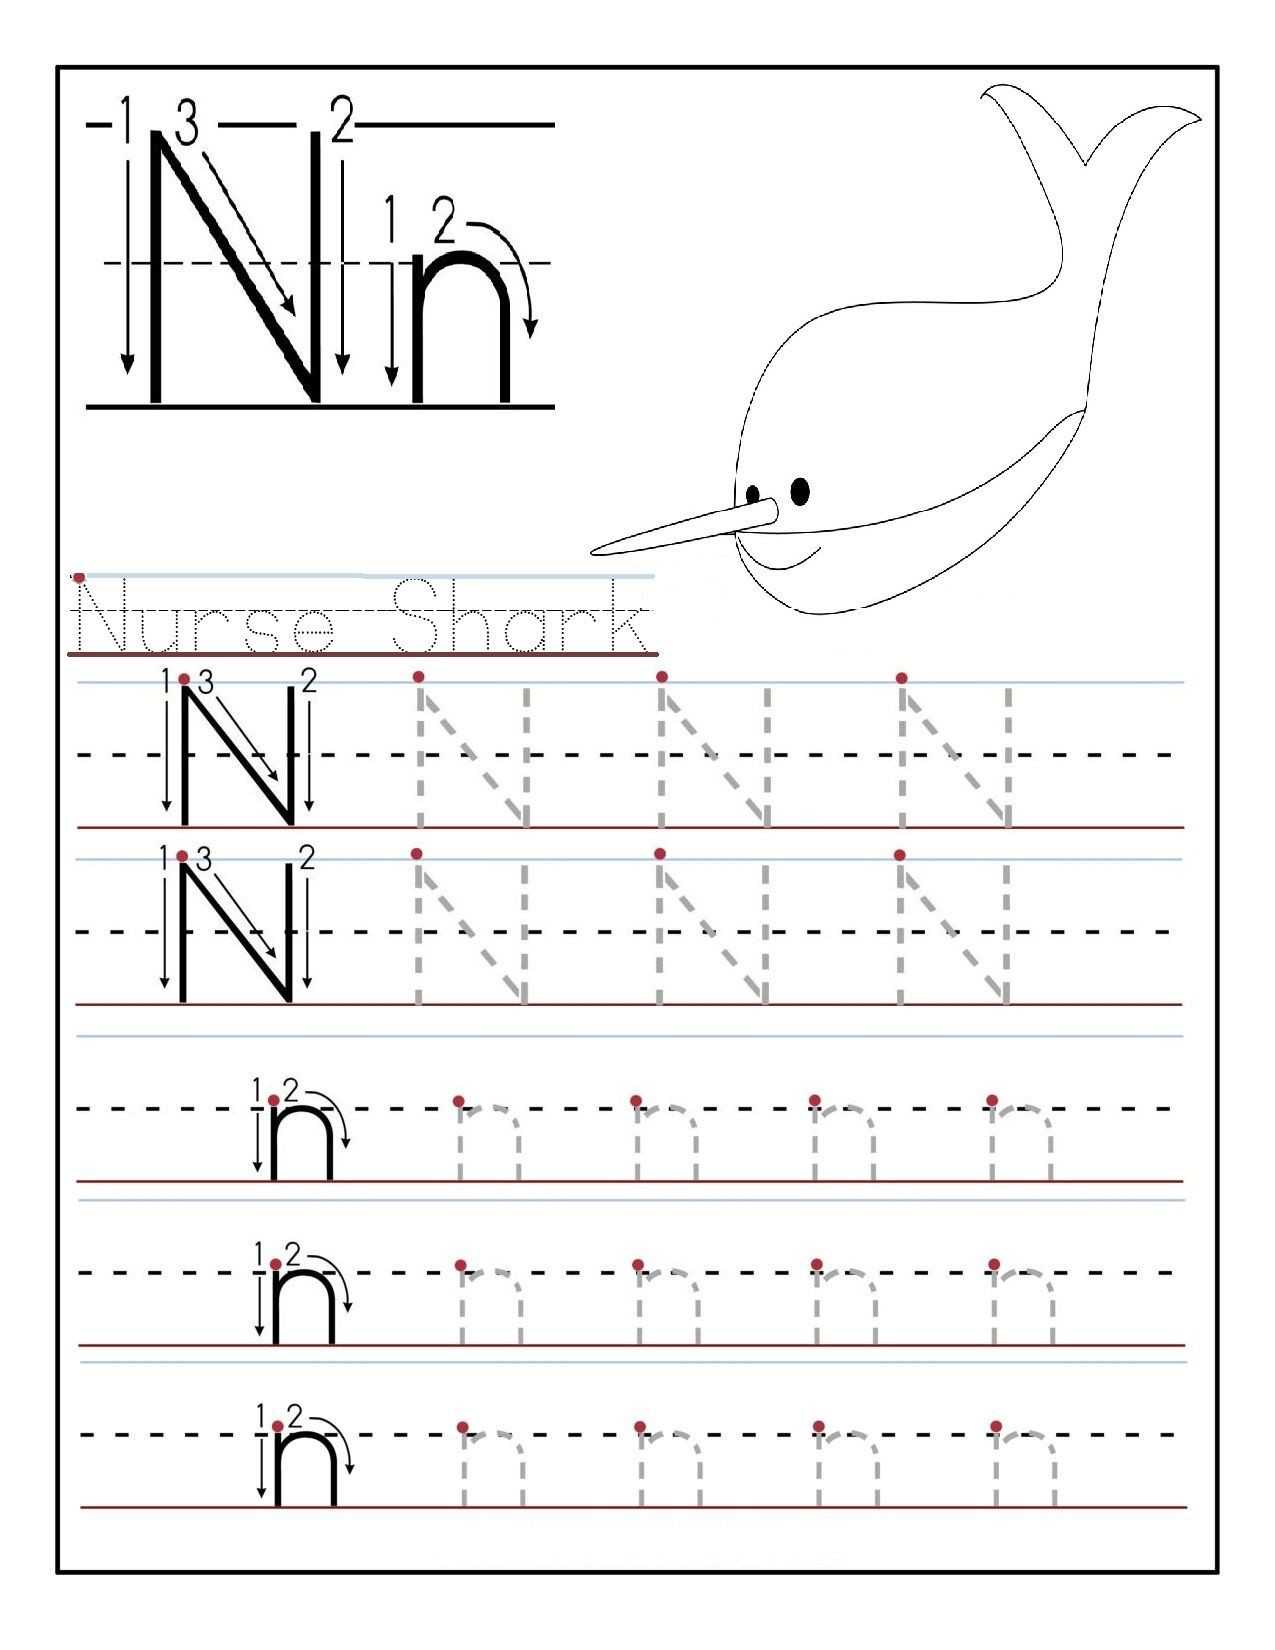 Worksheets for Children Along with Preschool Learning Pages New Letter N Worksheets for Preschool and